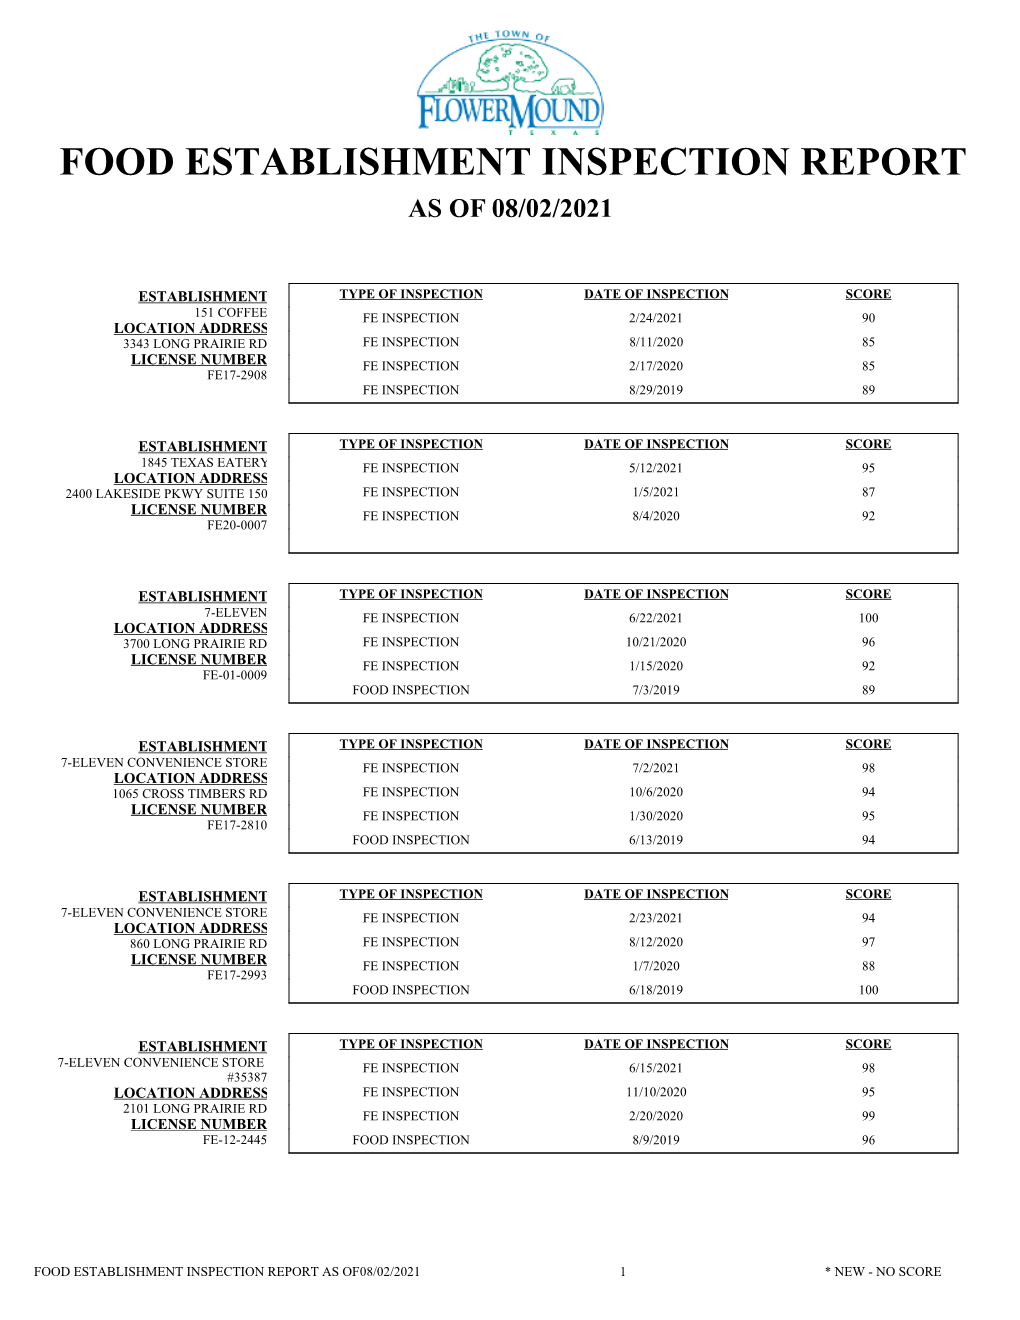 Food Establishment Inspection Report As of 08/02/2021